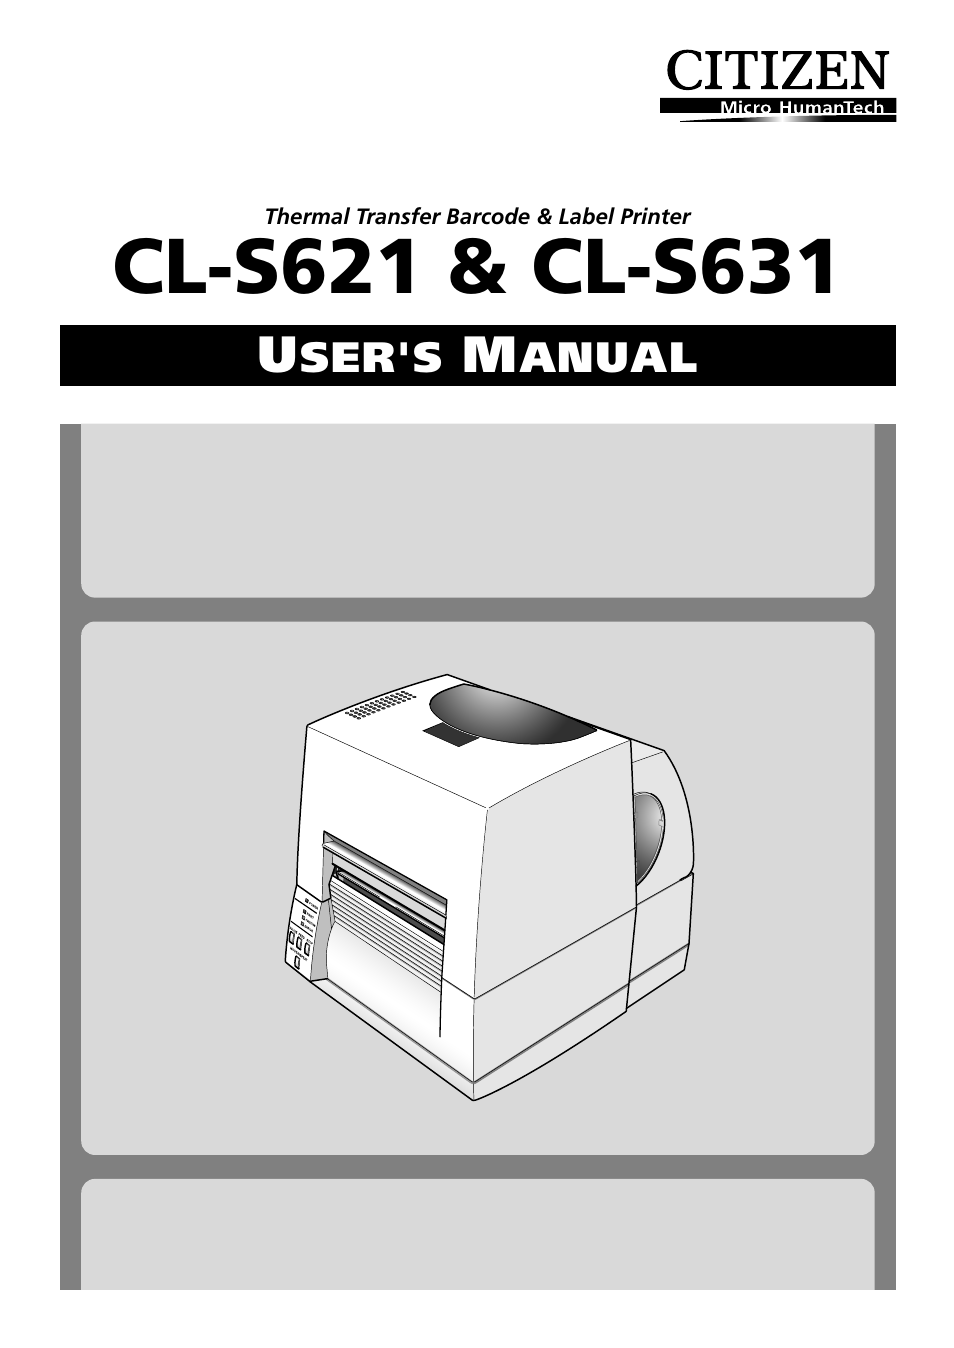 CITIZEN CL-S631 Manual | 66 pages for: